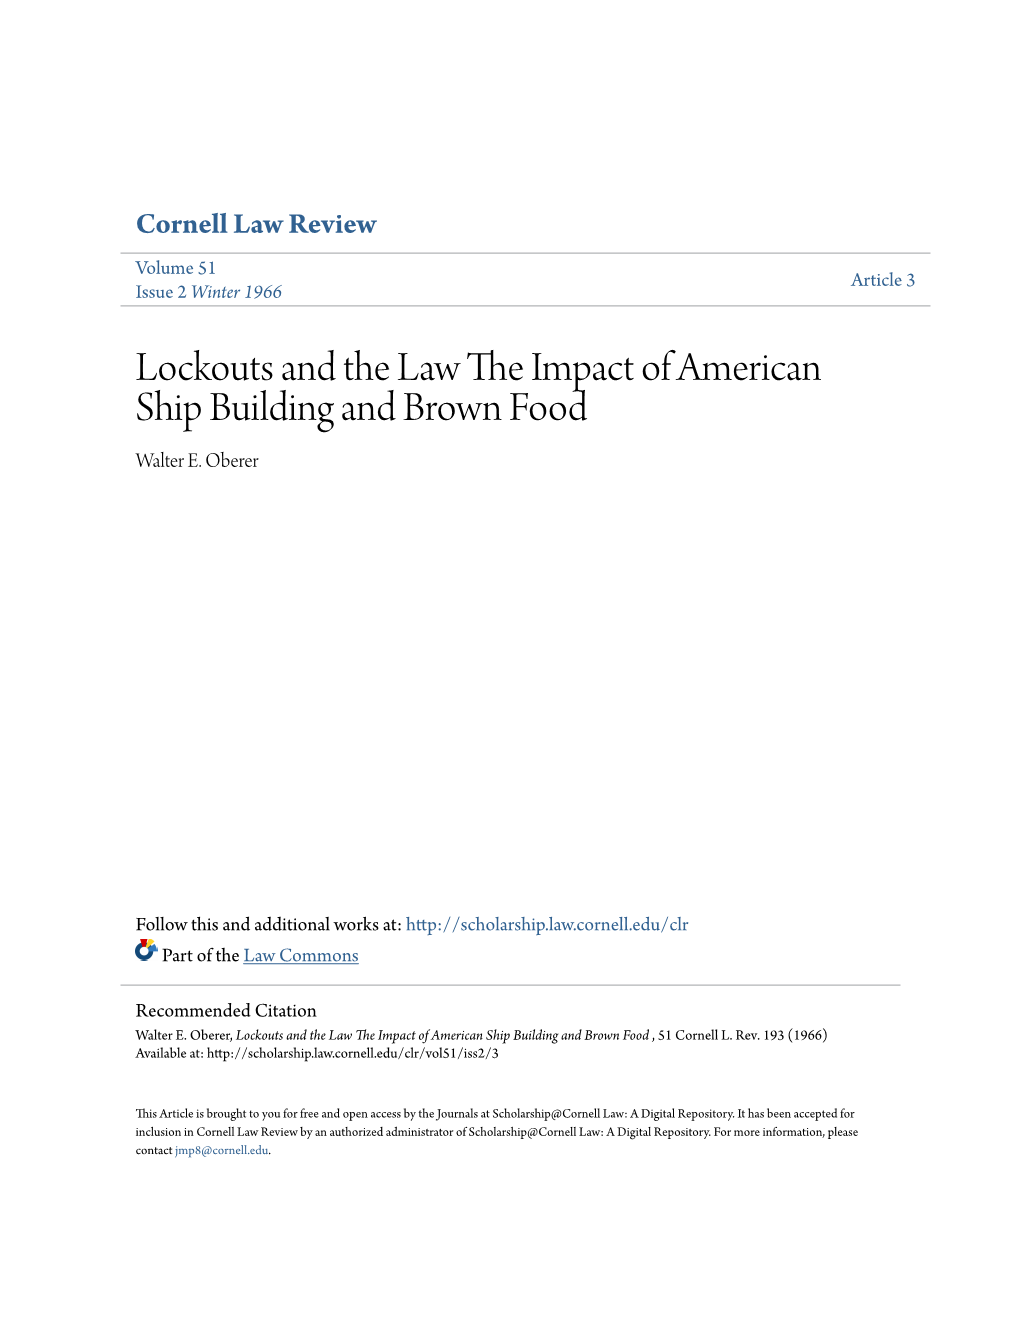 Lockouts and the Law the Impact of American Ship Building and Brown Food , 51 Cornell L